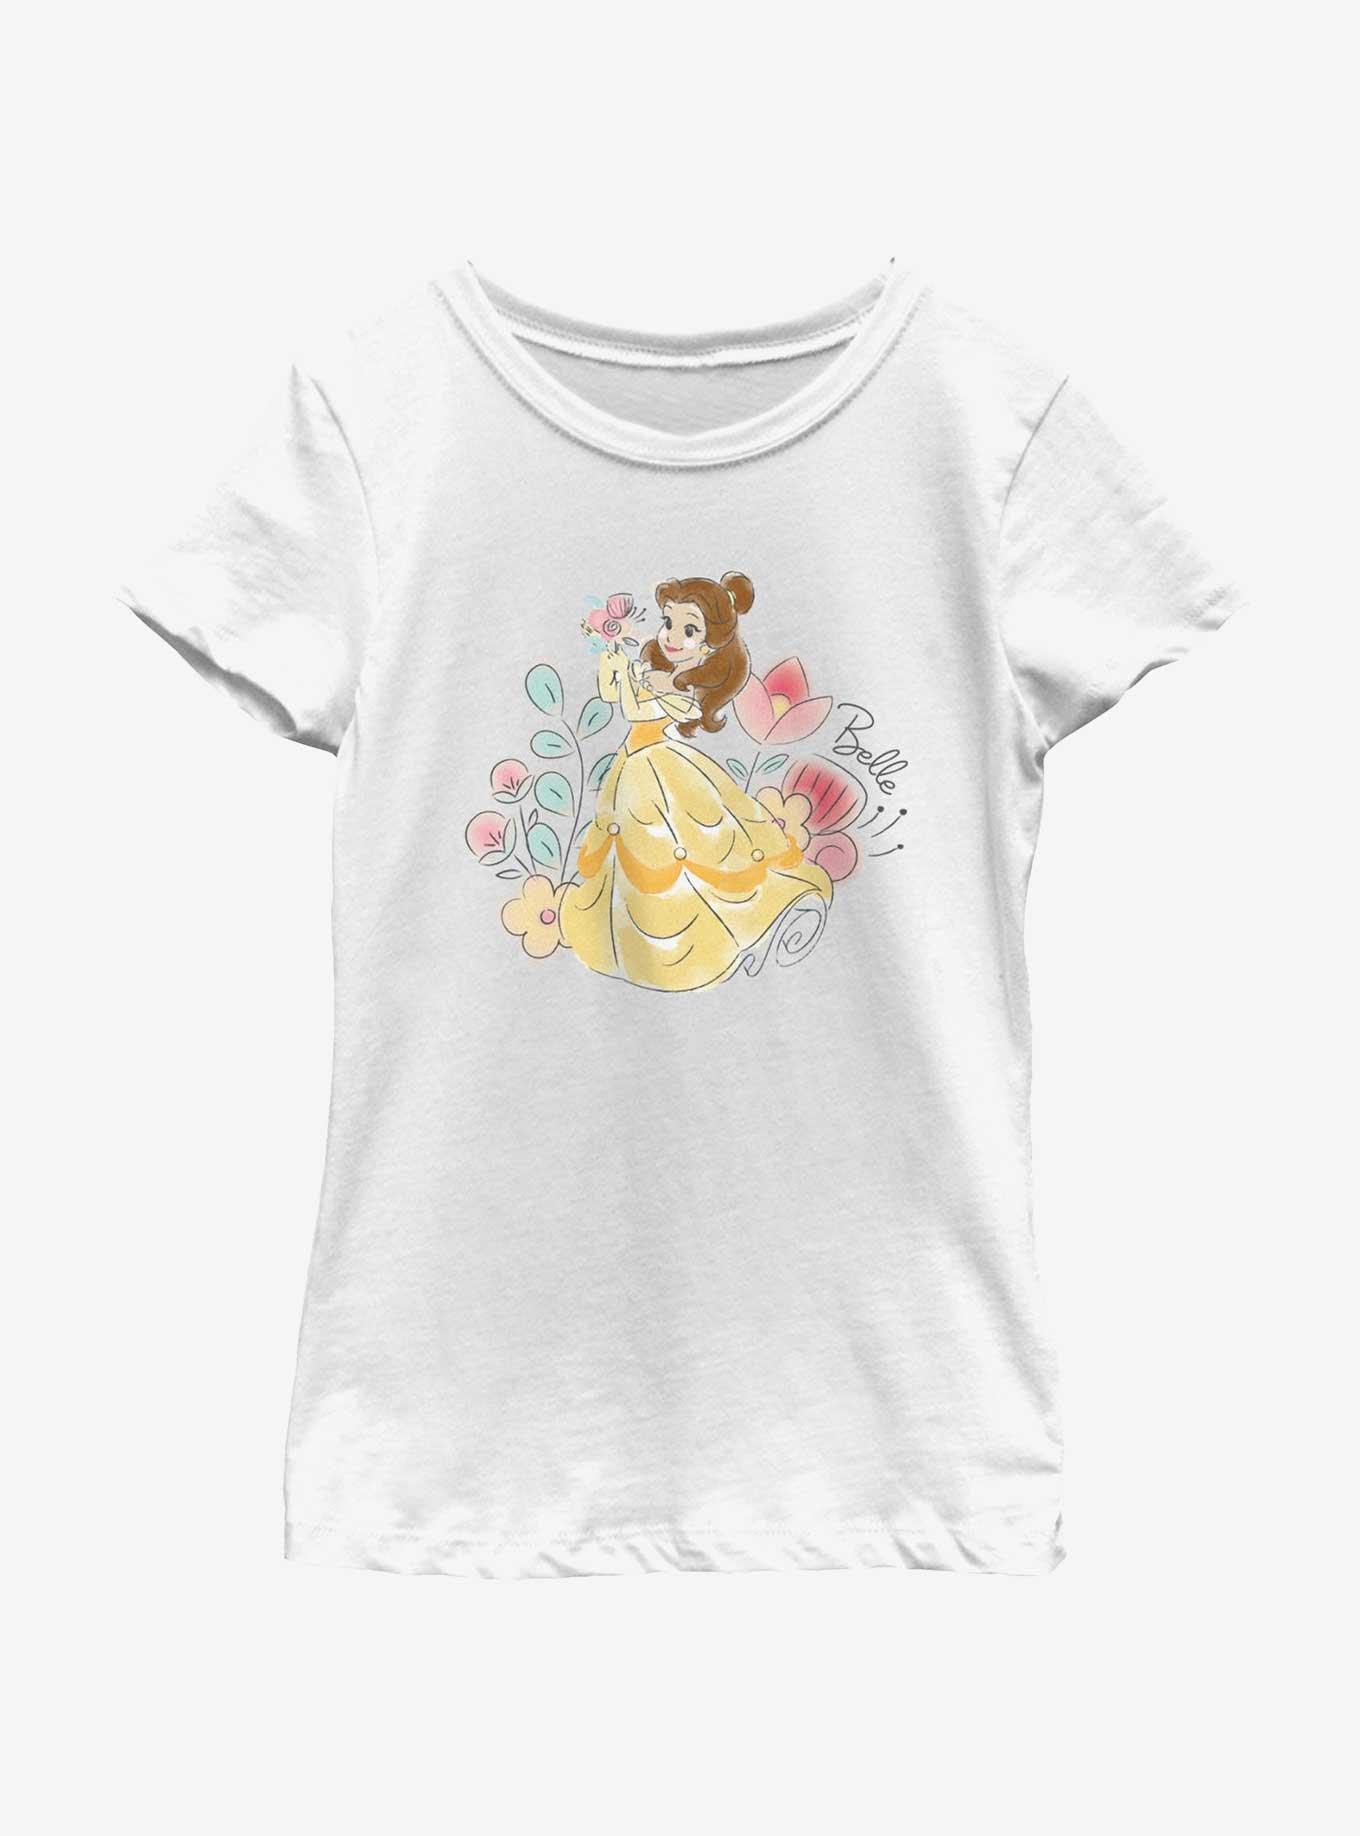 Disney Princesses Cute Belle With Flowers Youth Girls T-Shirt, WHITE, hi-res